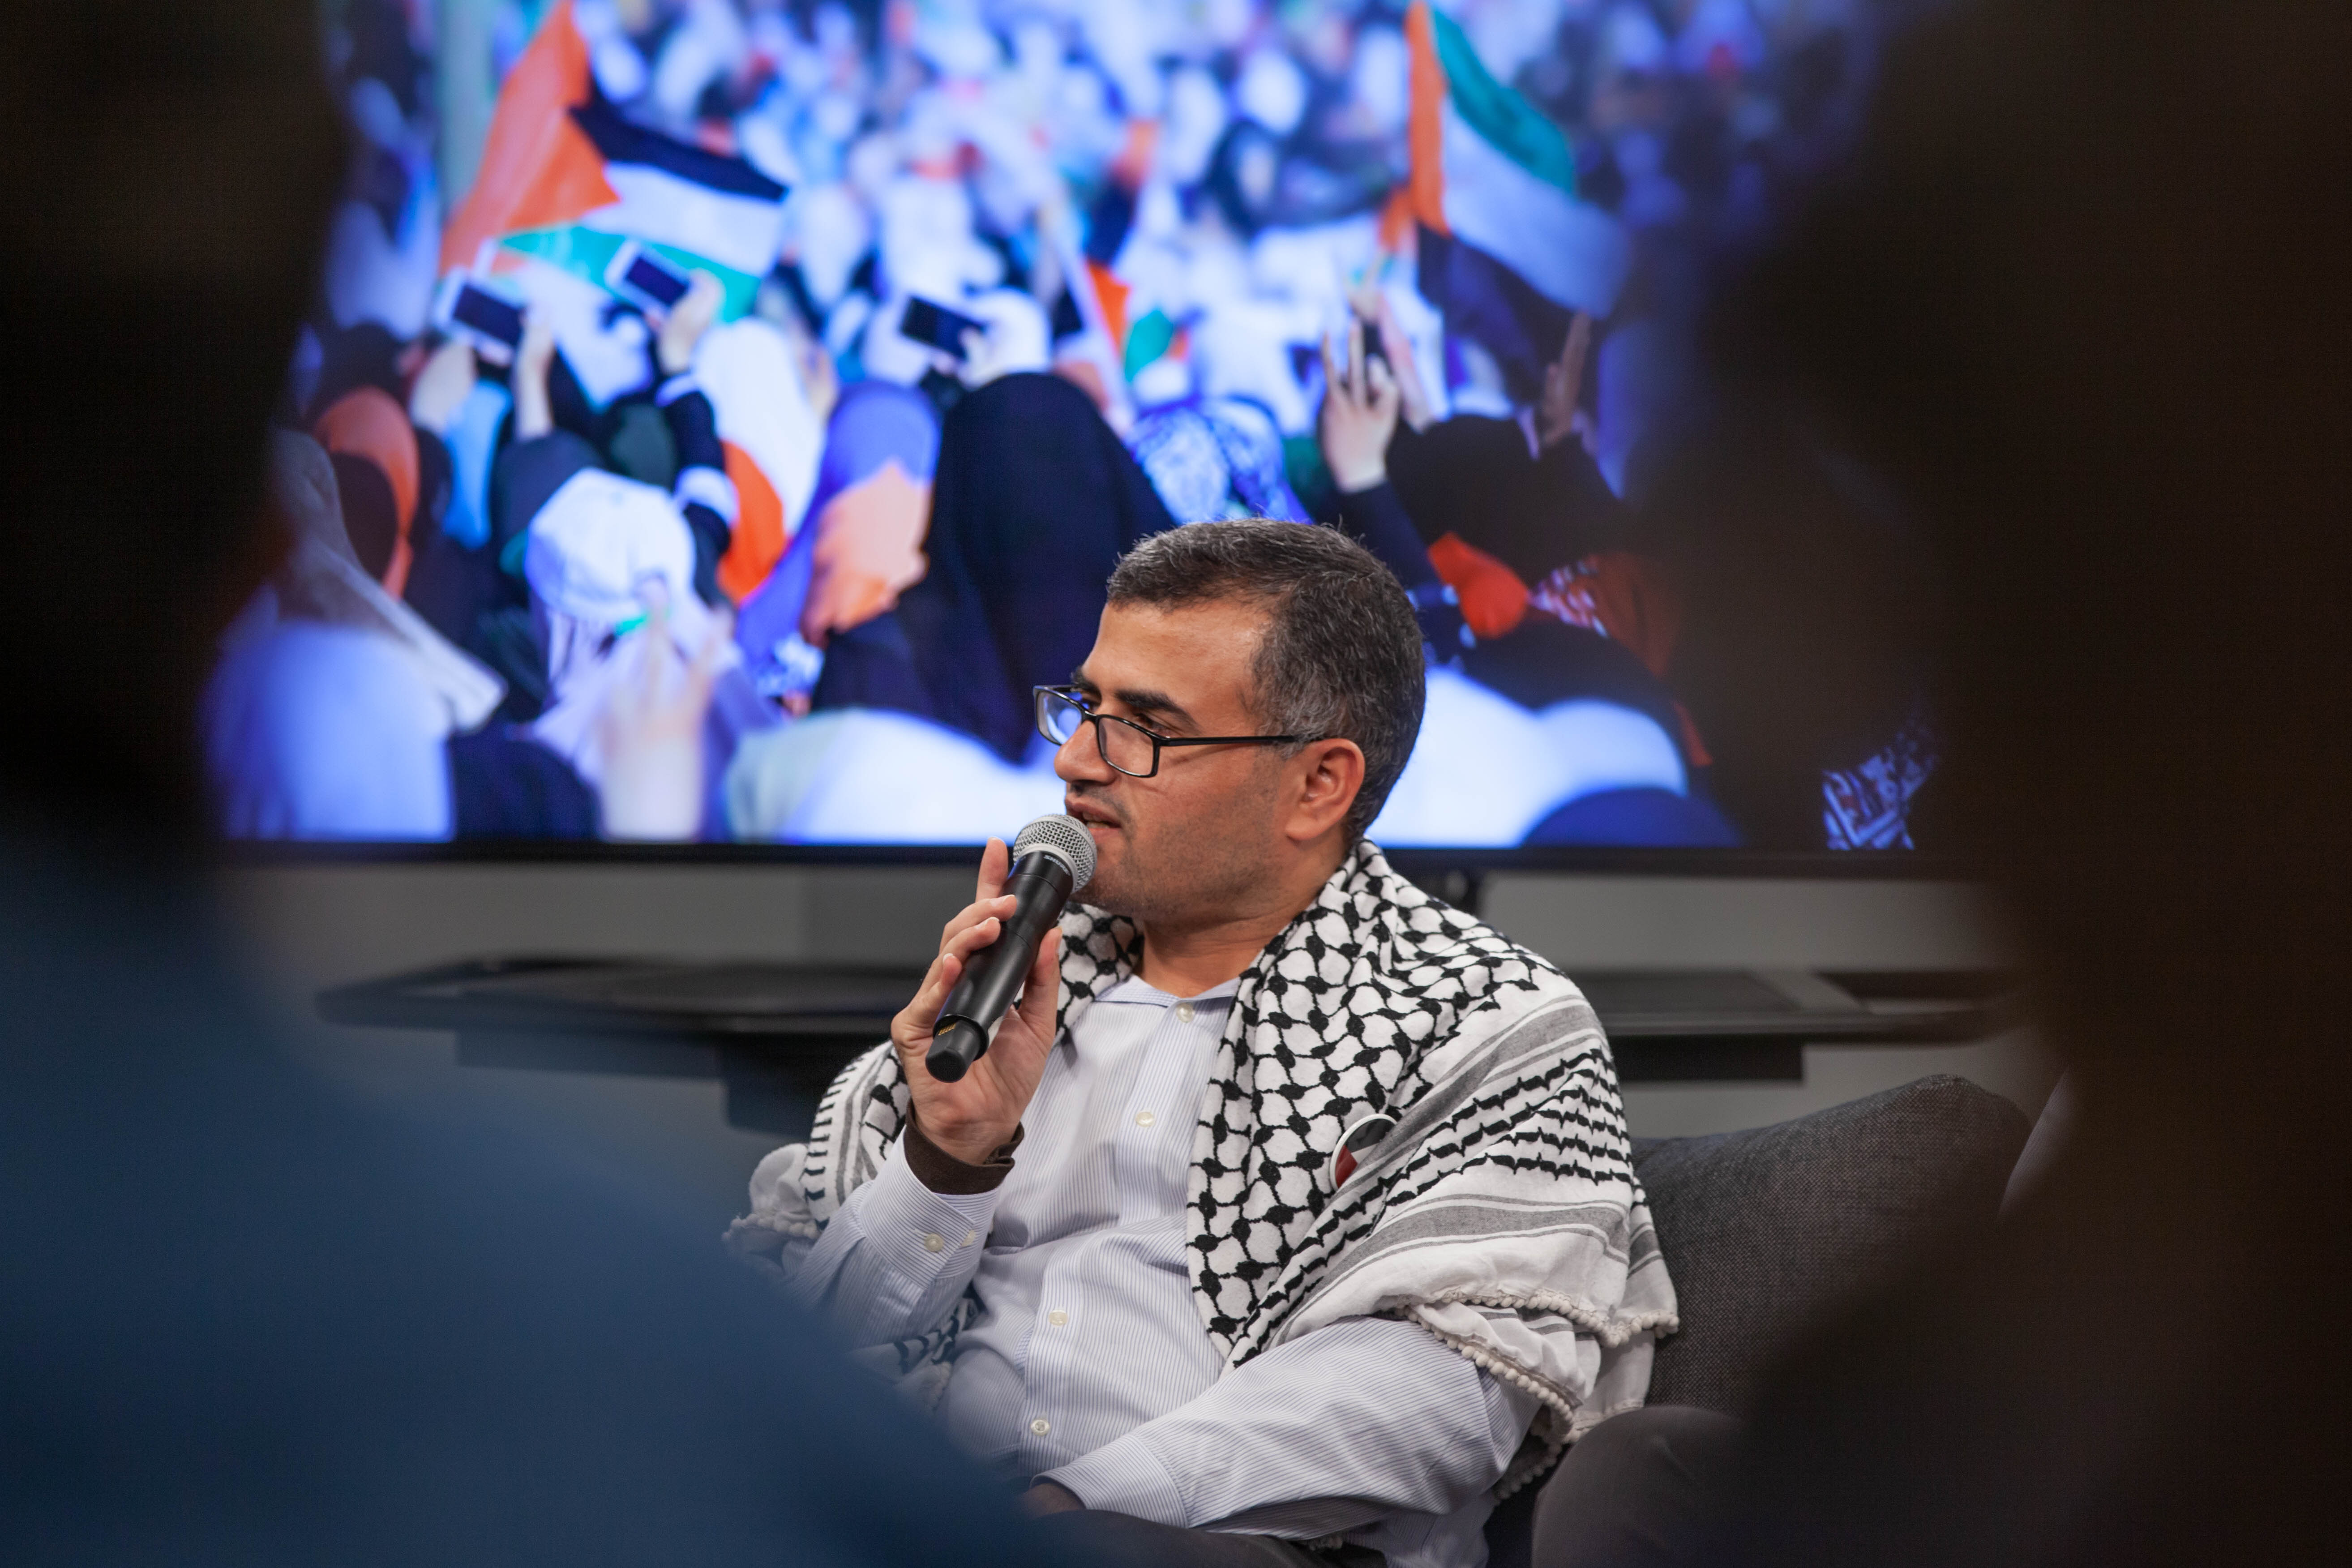 A prominent Palestinian organizer speaks to an audience during a speaking tour